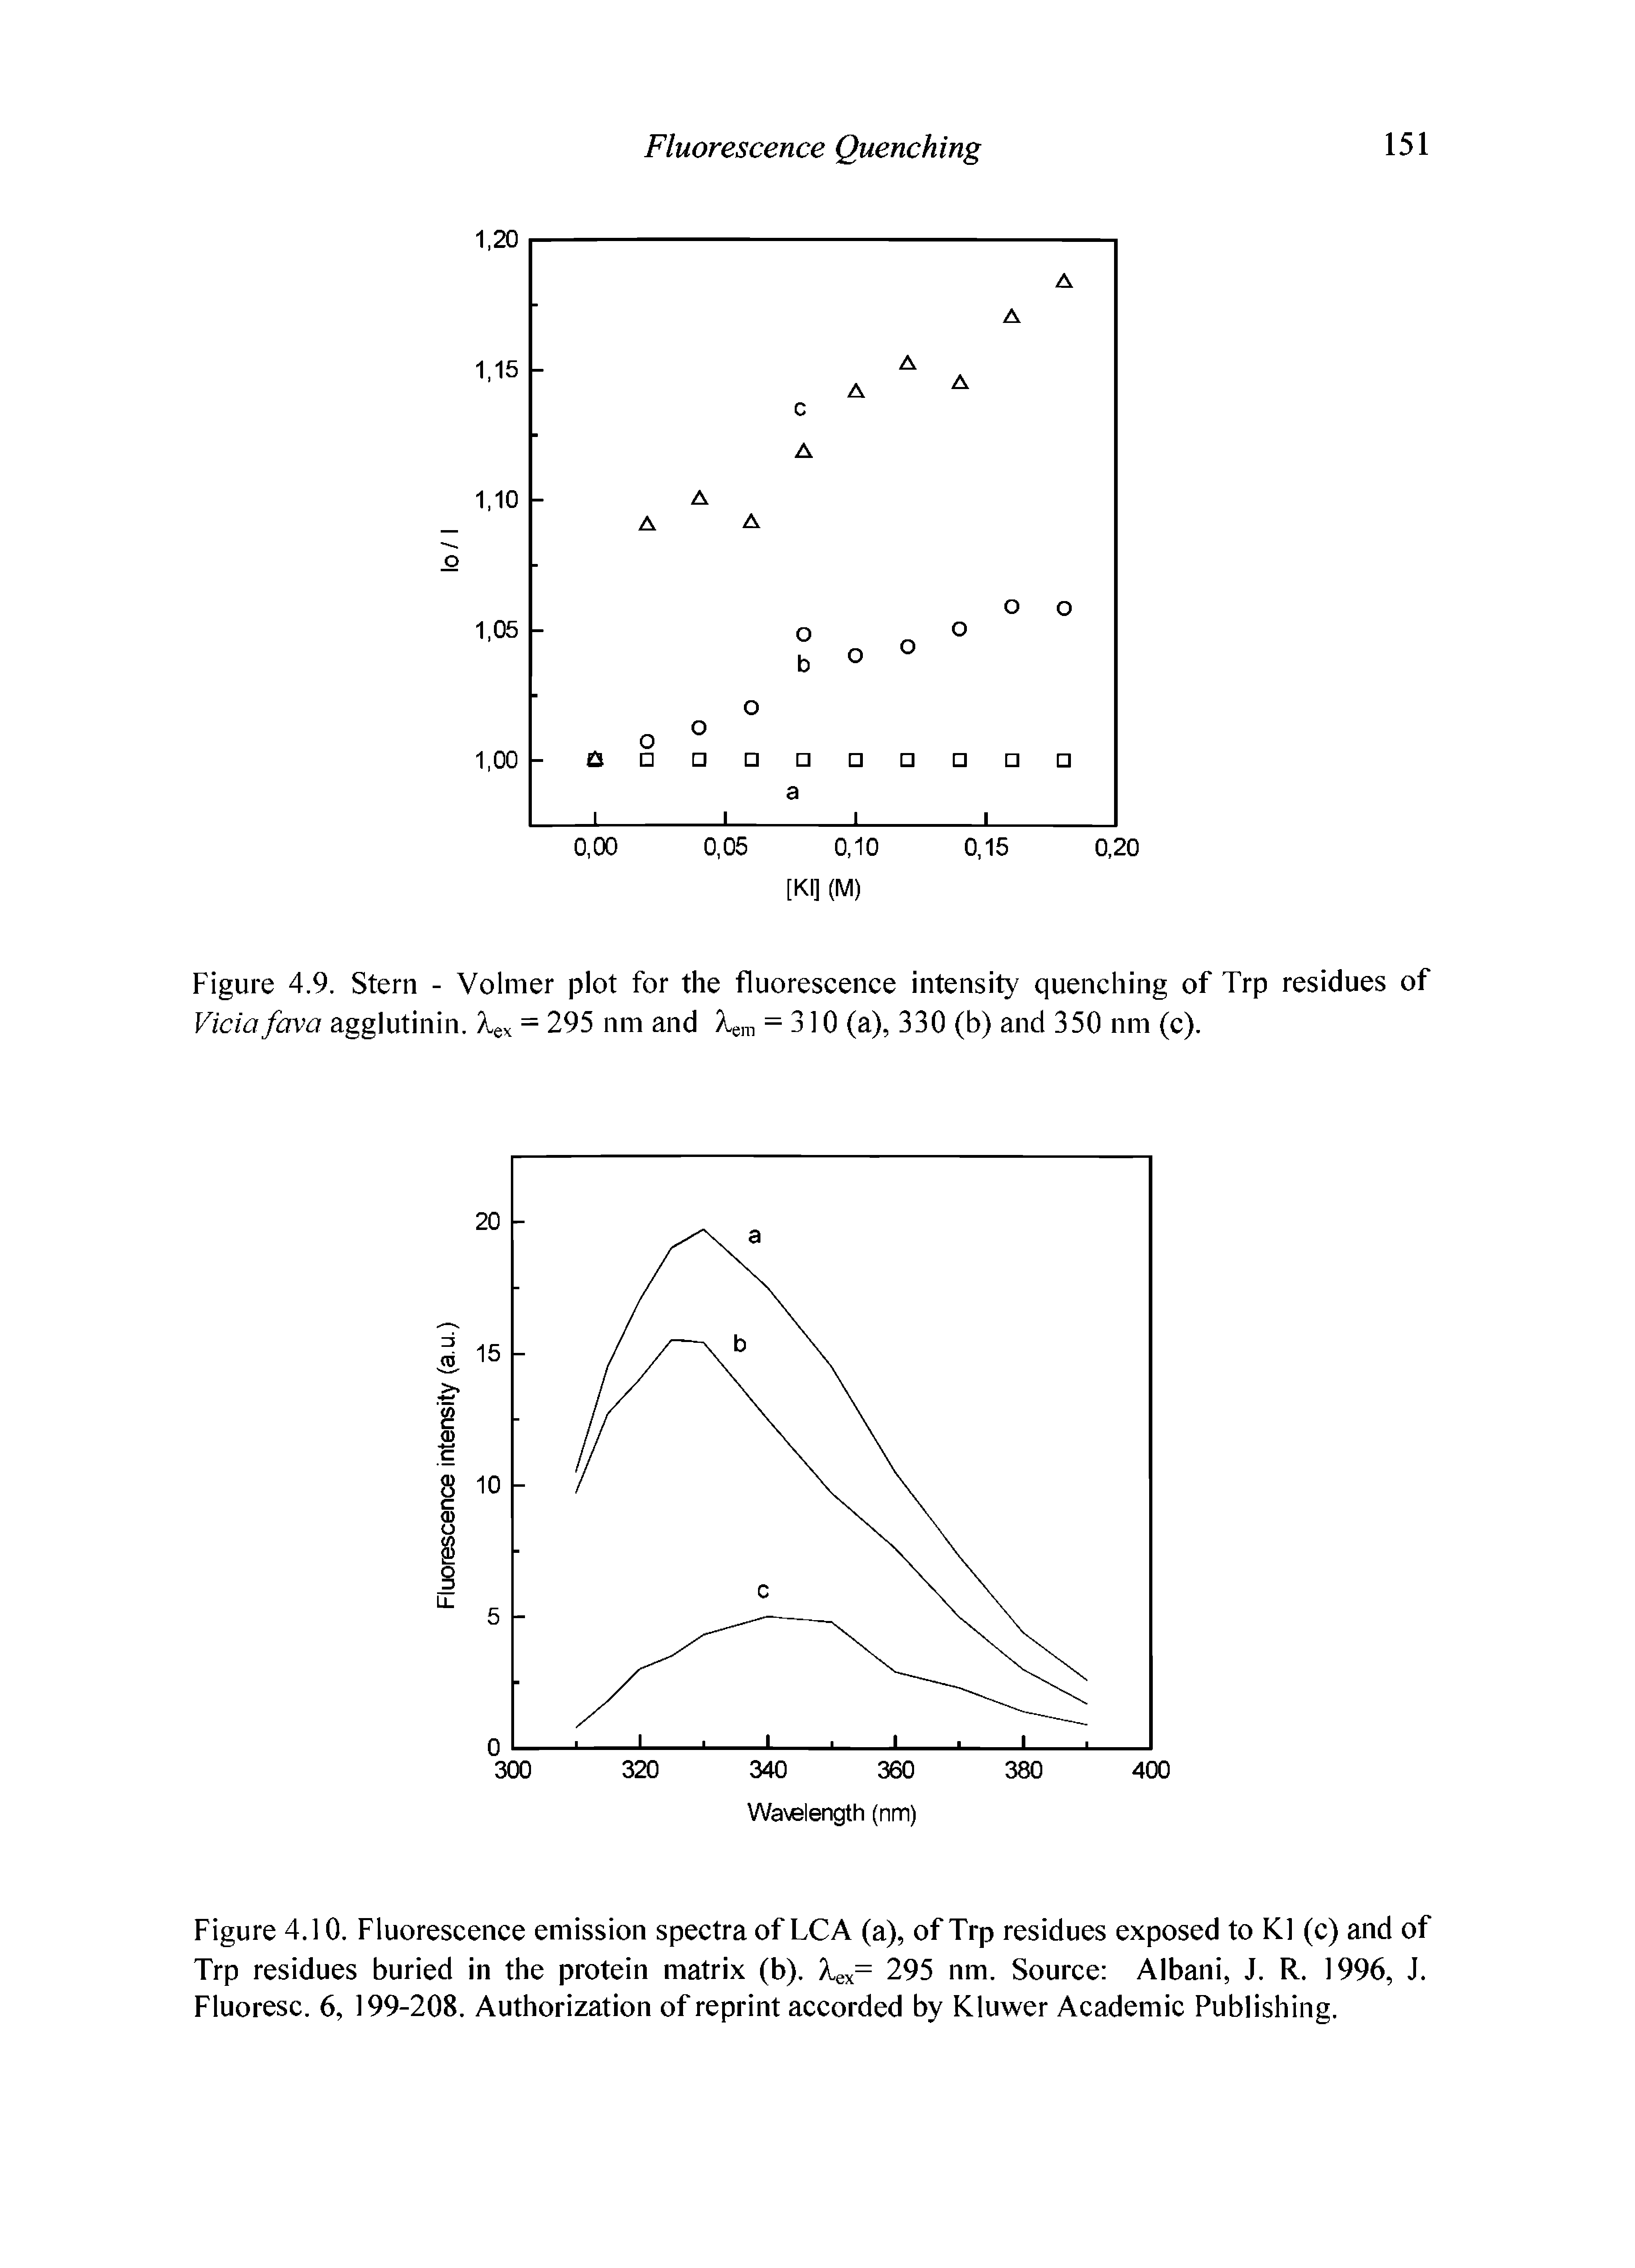 Figure 4.9. Stern - Volmer plot for the fluorescence intensity quenching of Trp residues of Vida fava agglutinin, lex = 295 nm and lem = 310 (a), 330 (b) and 350 nm (c).